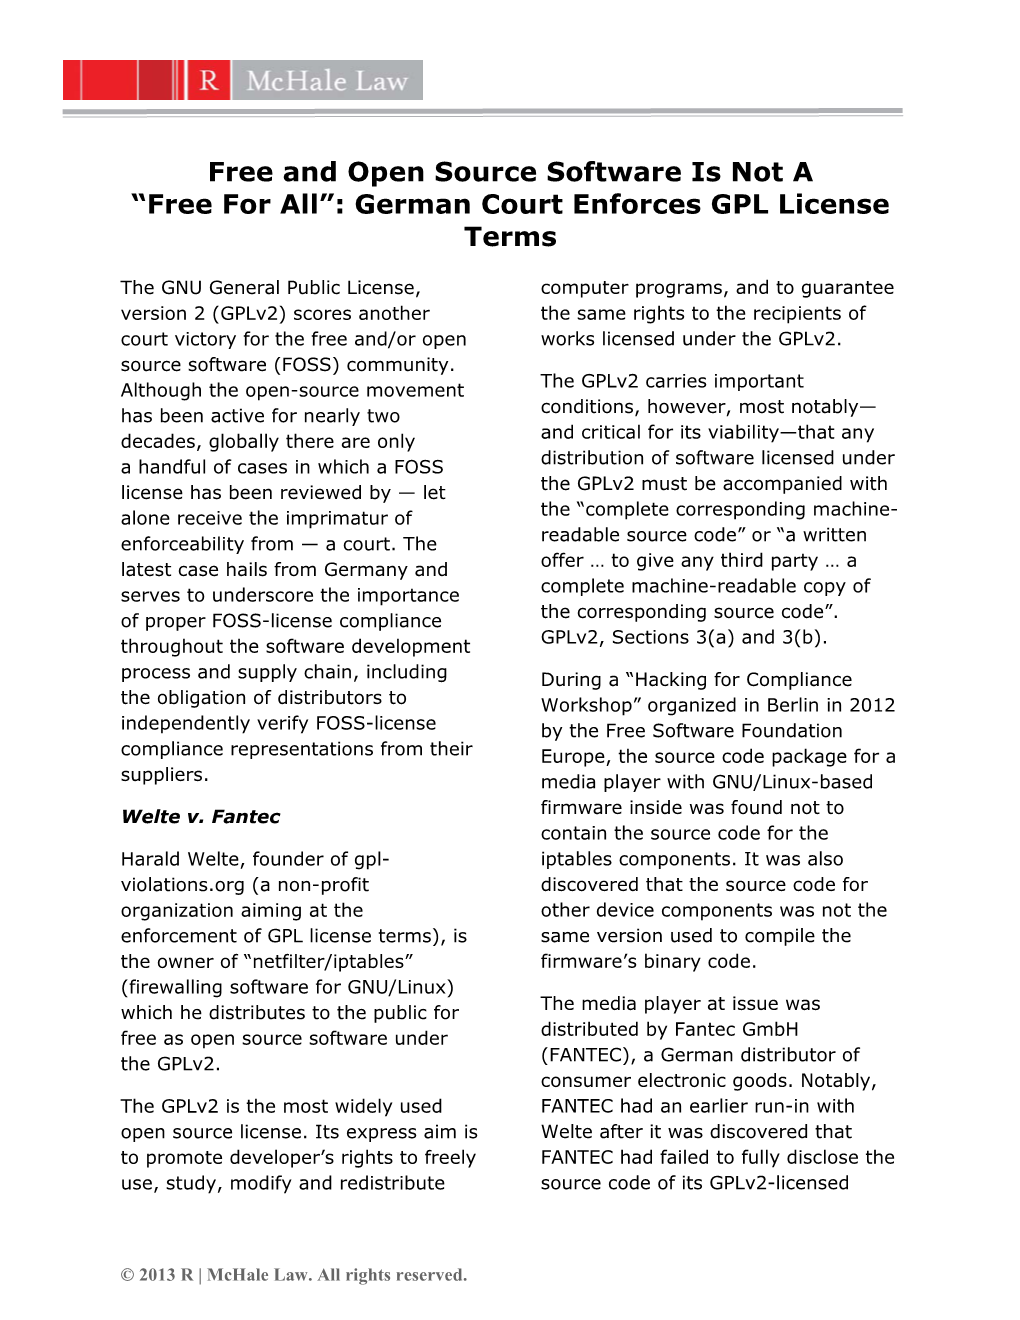 Free and Open Source Software Is Not a “Free for All”: German Court Enforces GPL License Terms